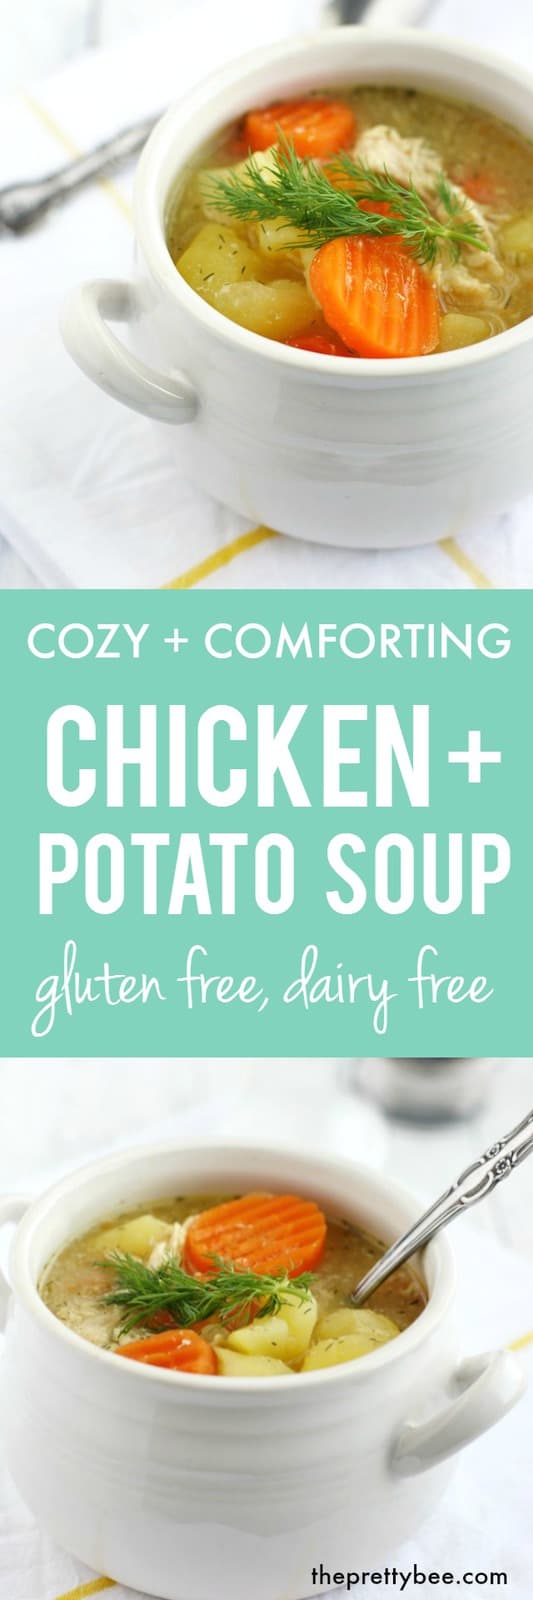 Cozy and delicious chicken potato soup is a hearty meal to serve on a cold day!